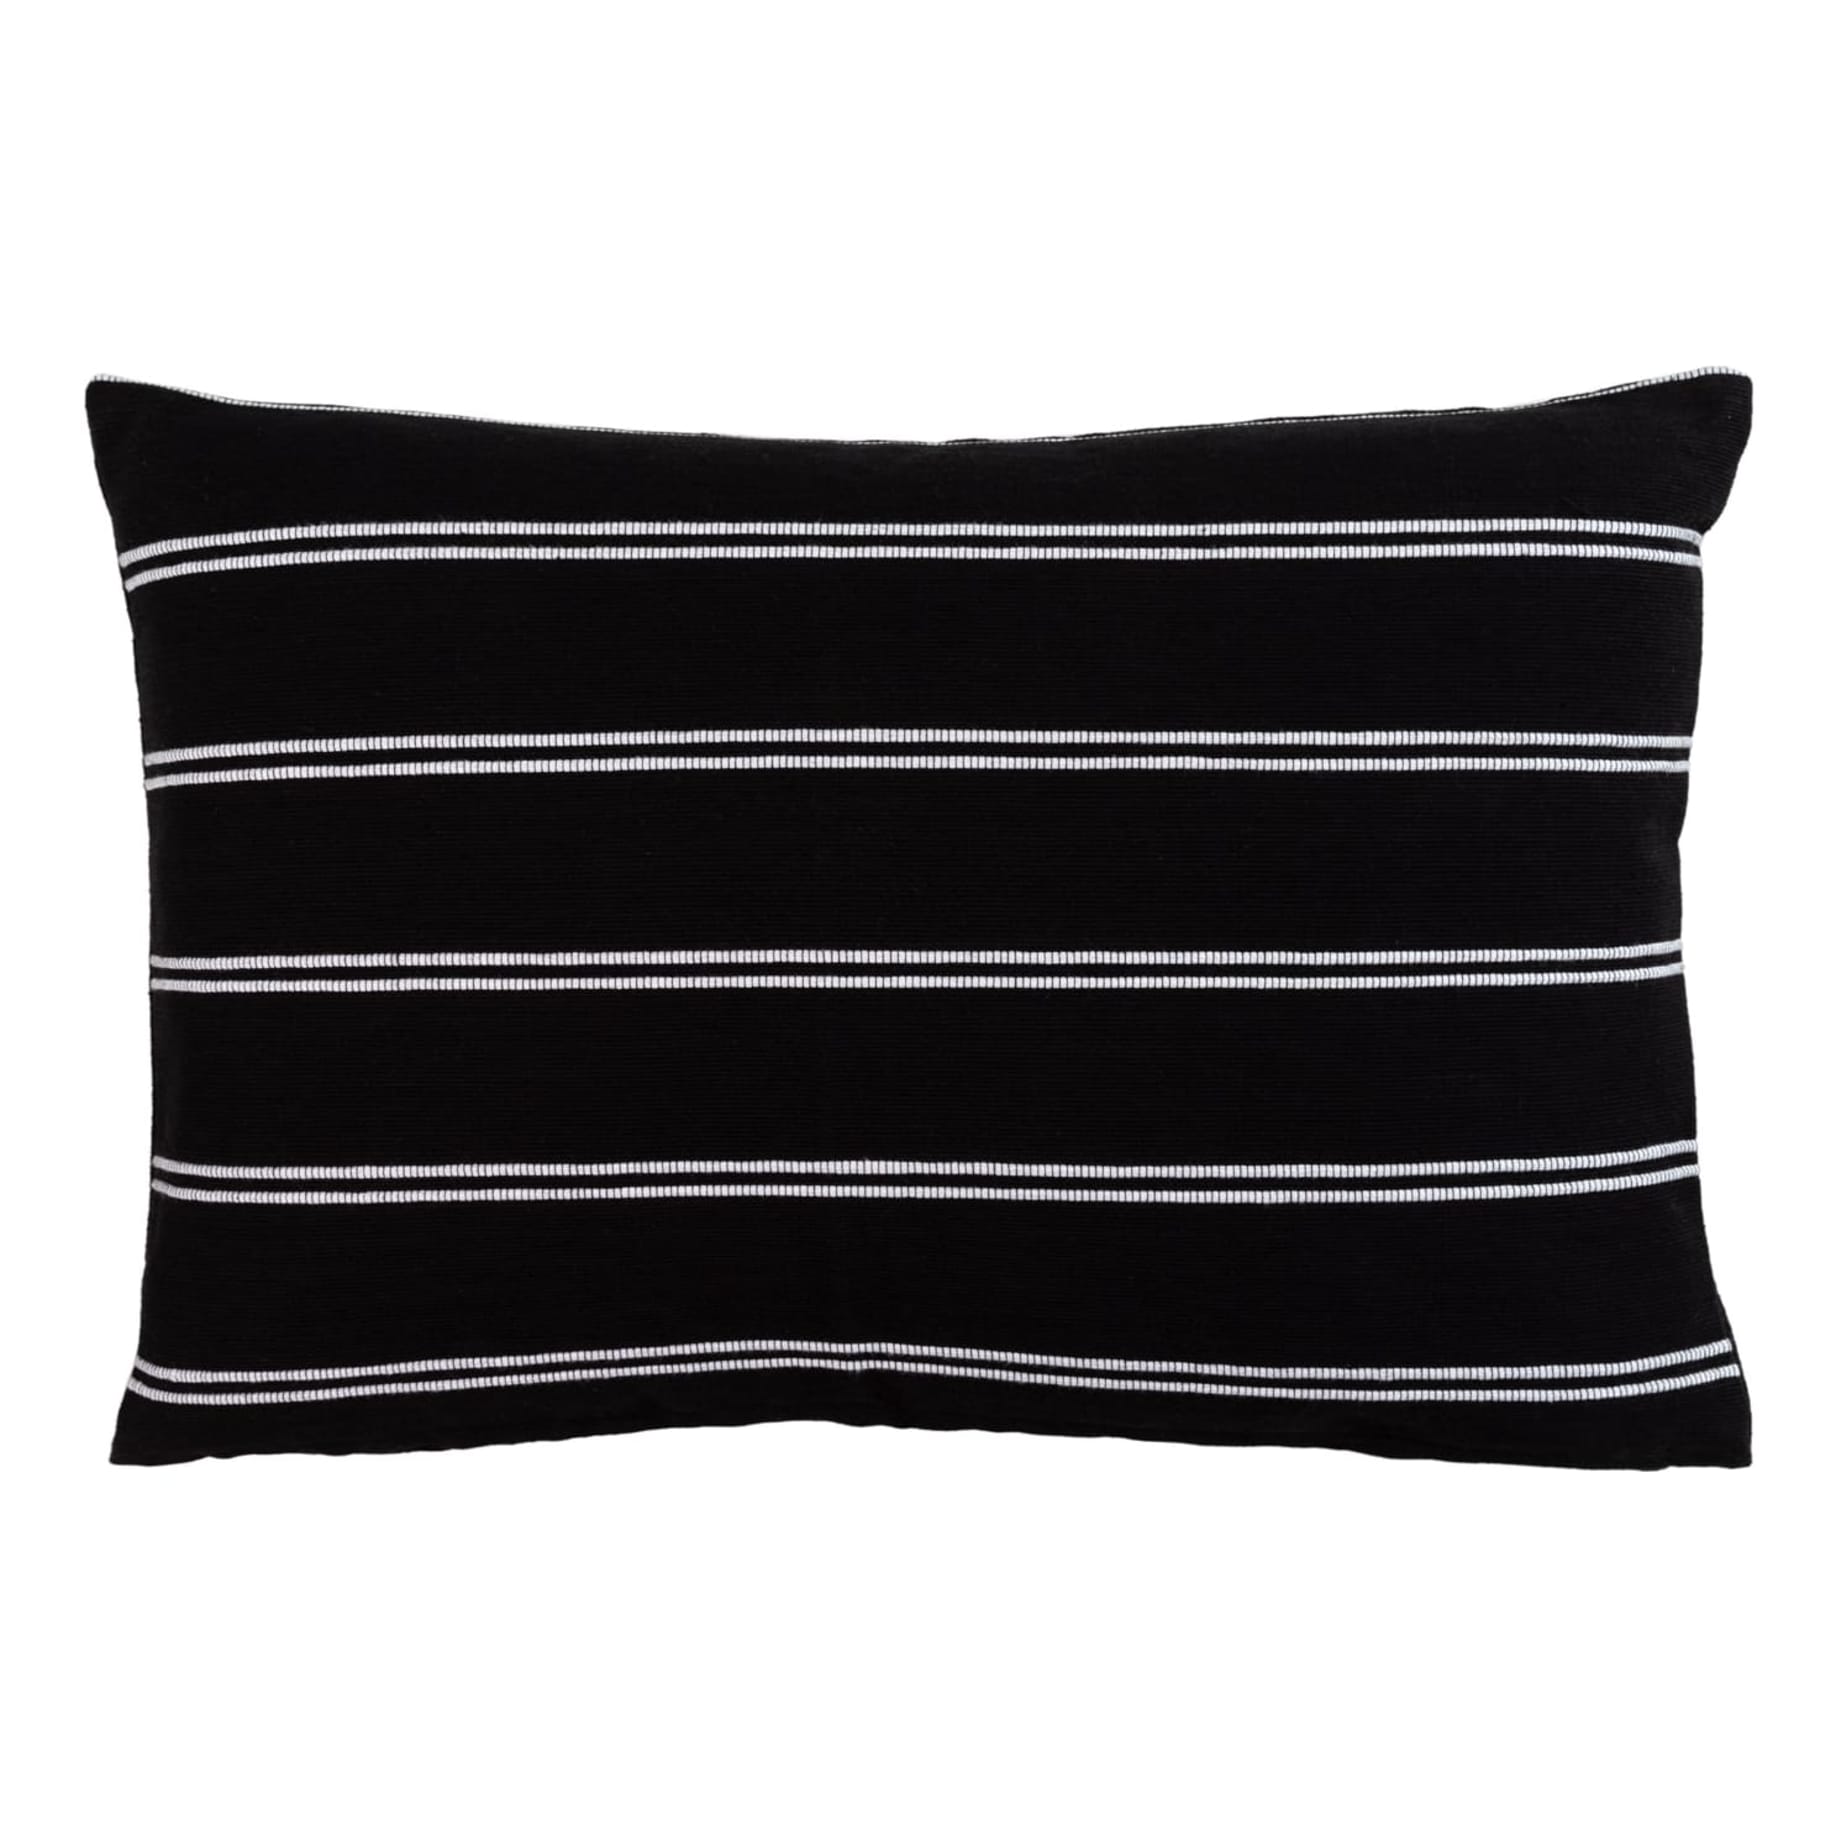 Montreal Feather Fill Cushion 60x40cm in Noir